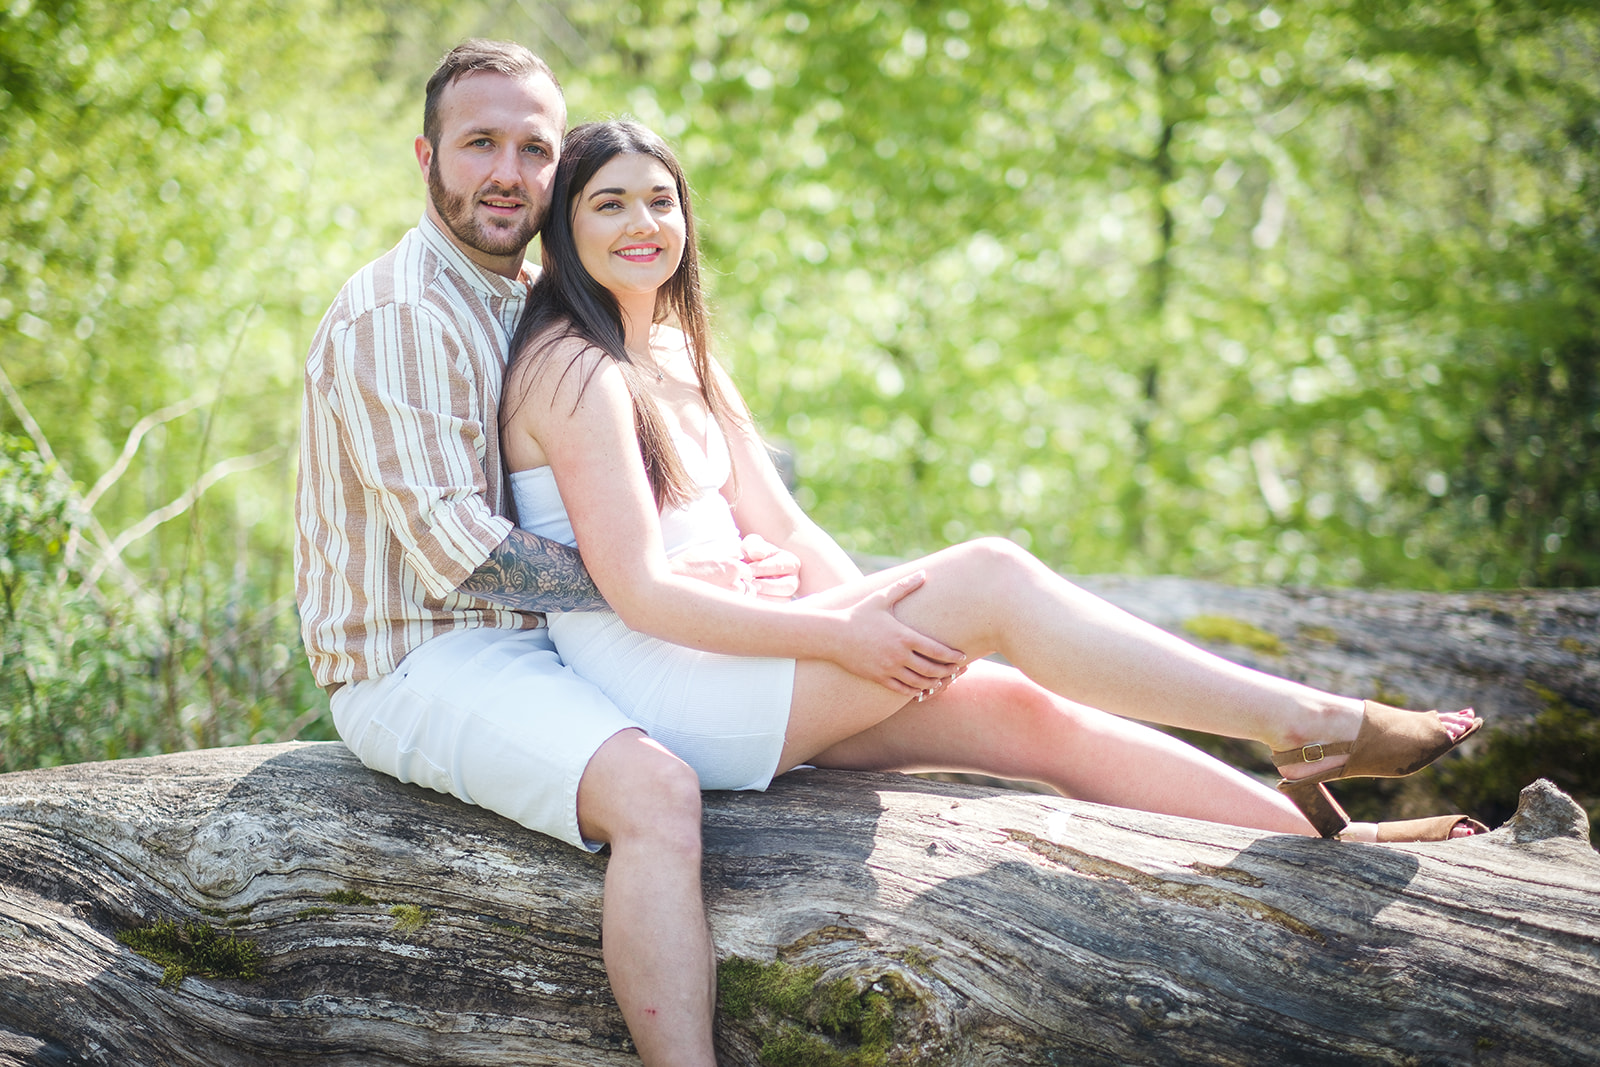 Engaged couple sitting on a fallen tree